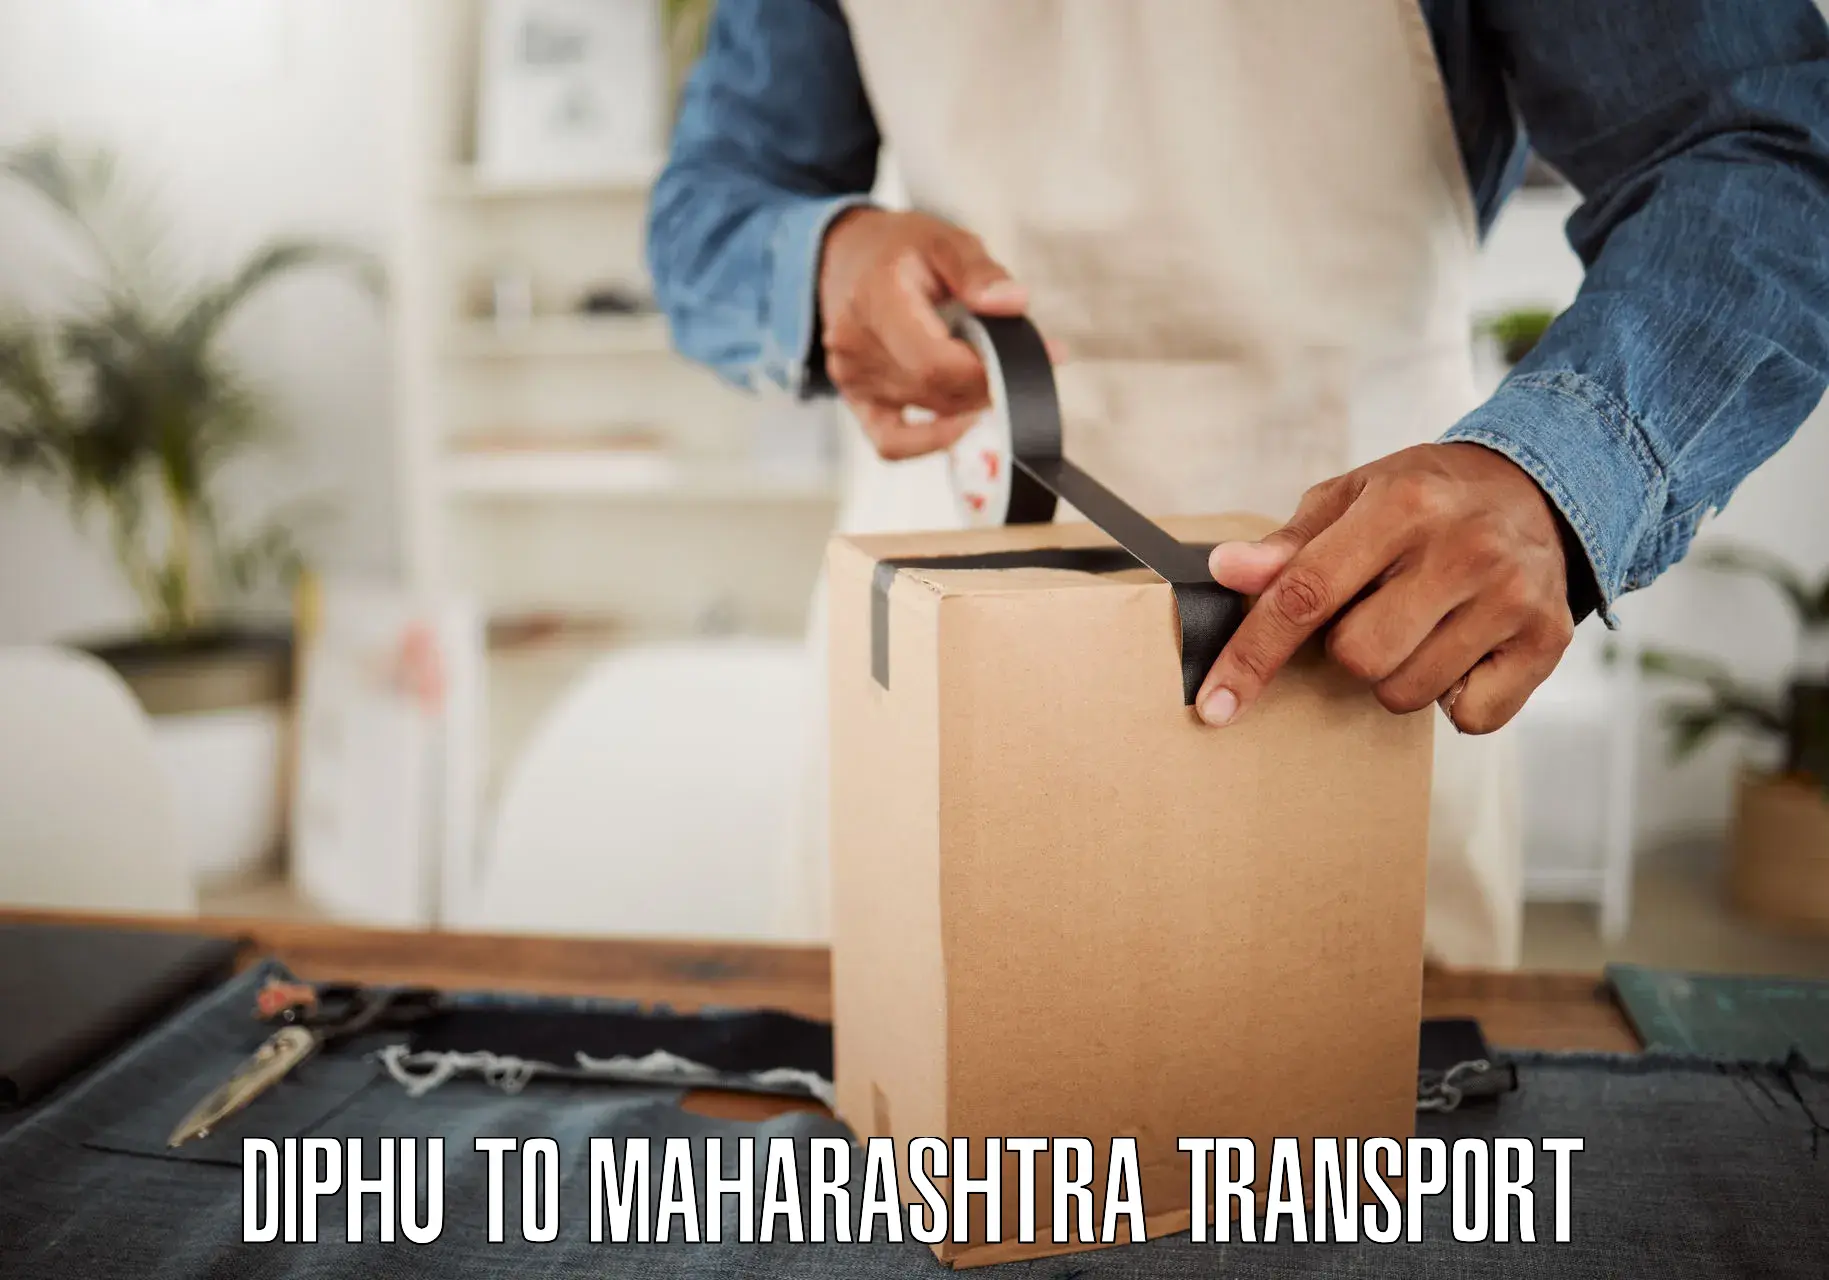 Parcel transport services Diphu to Parbhani